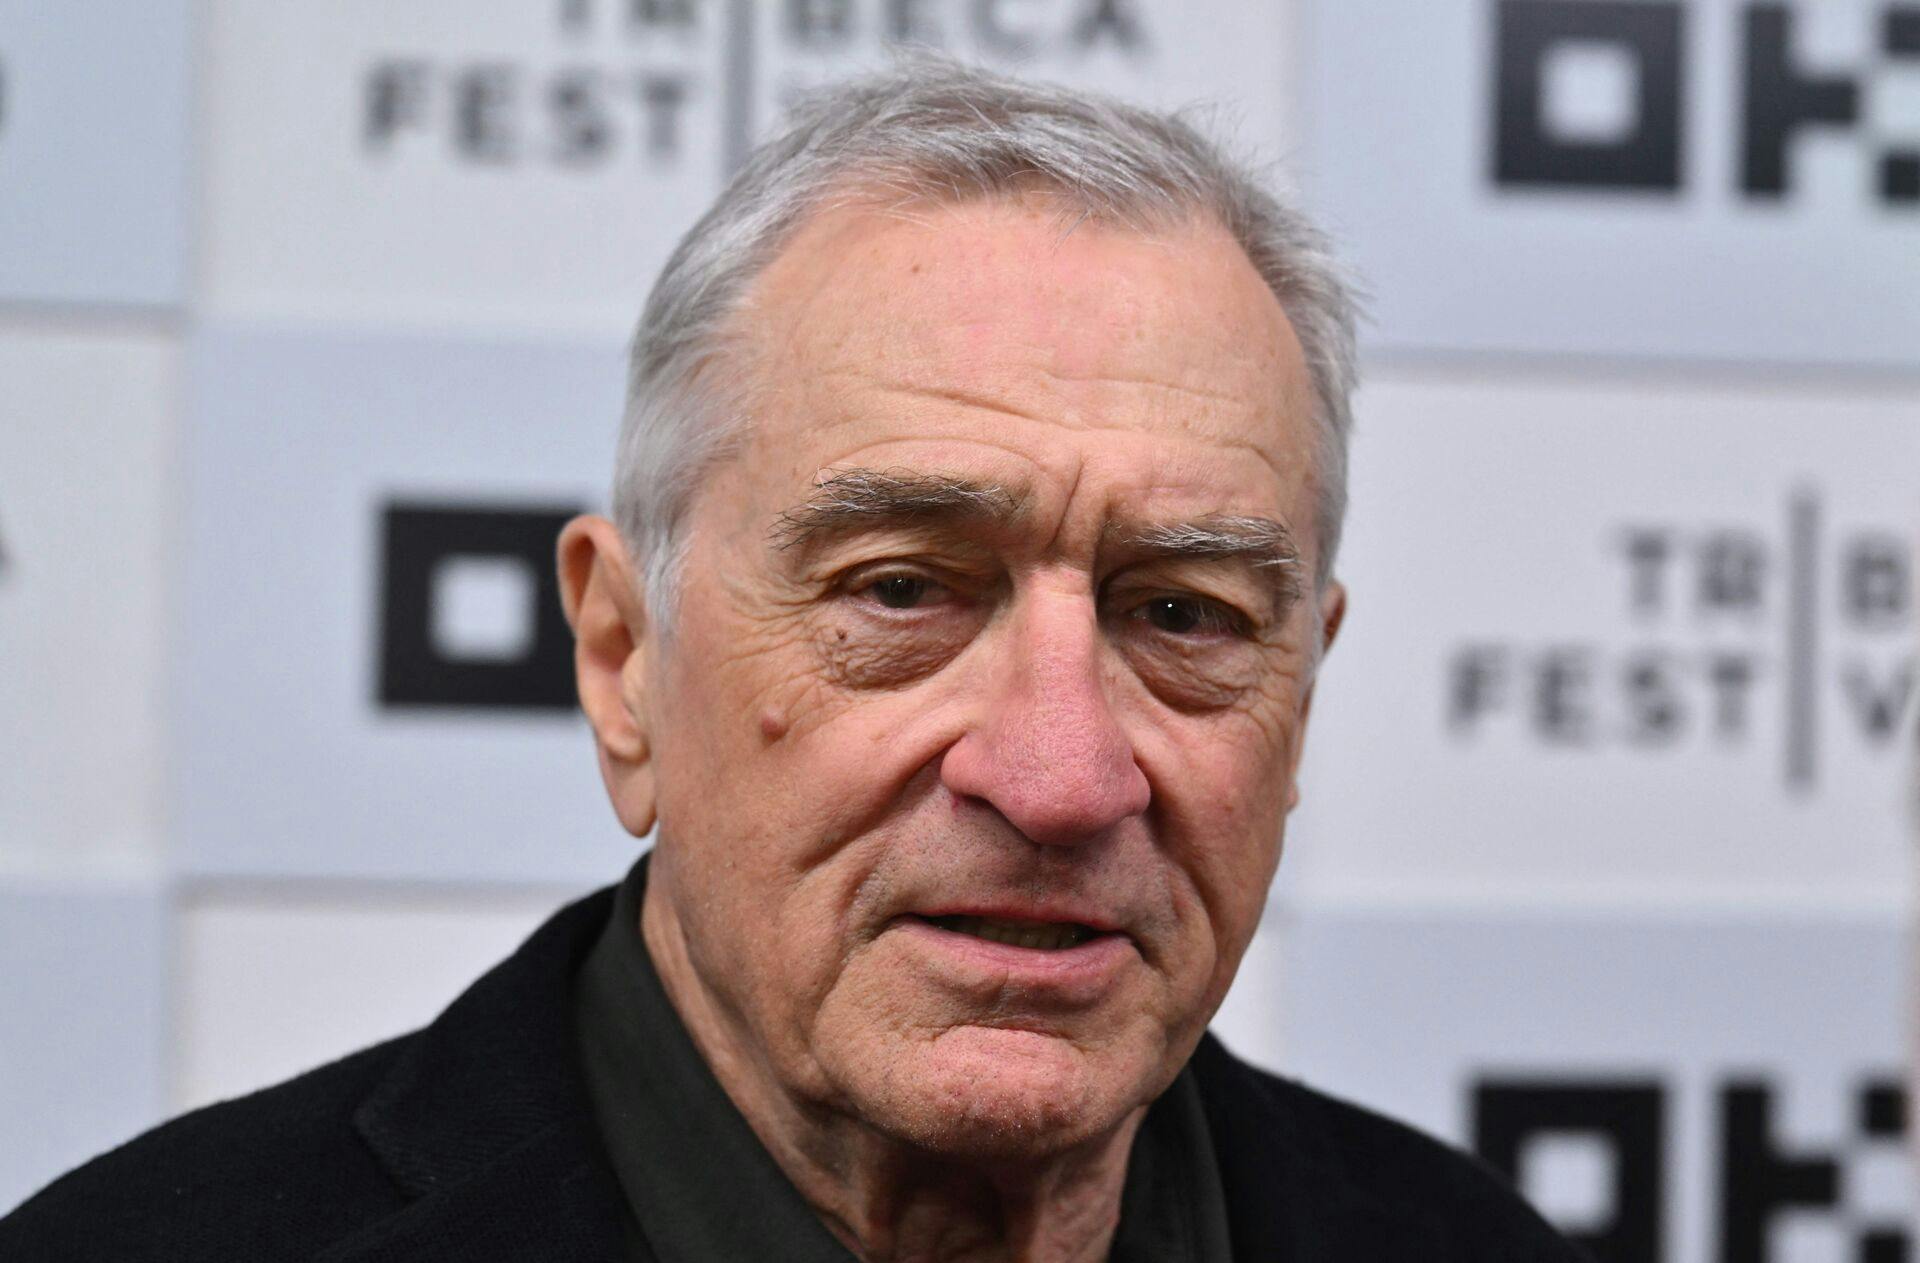 US actor Robert De Niro arrives to the screening of "Kiss the Future" during the opening night of the Tribeca Film Festival at OKX Theater in New York City on June 7, 2023. (Photo by ANGELA WEISS / AFP)